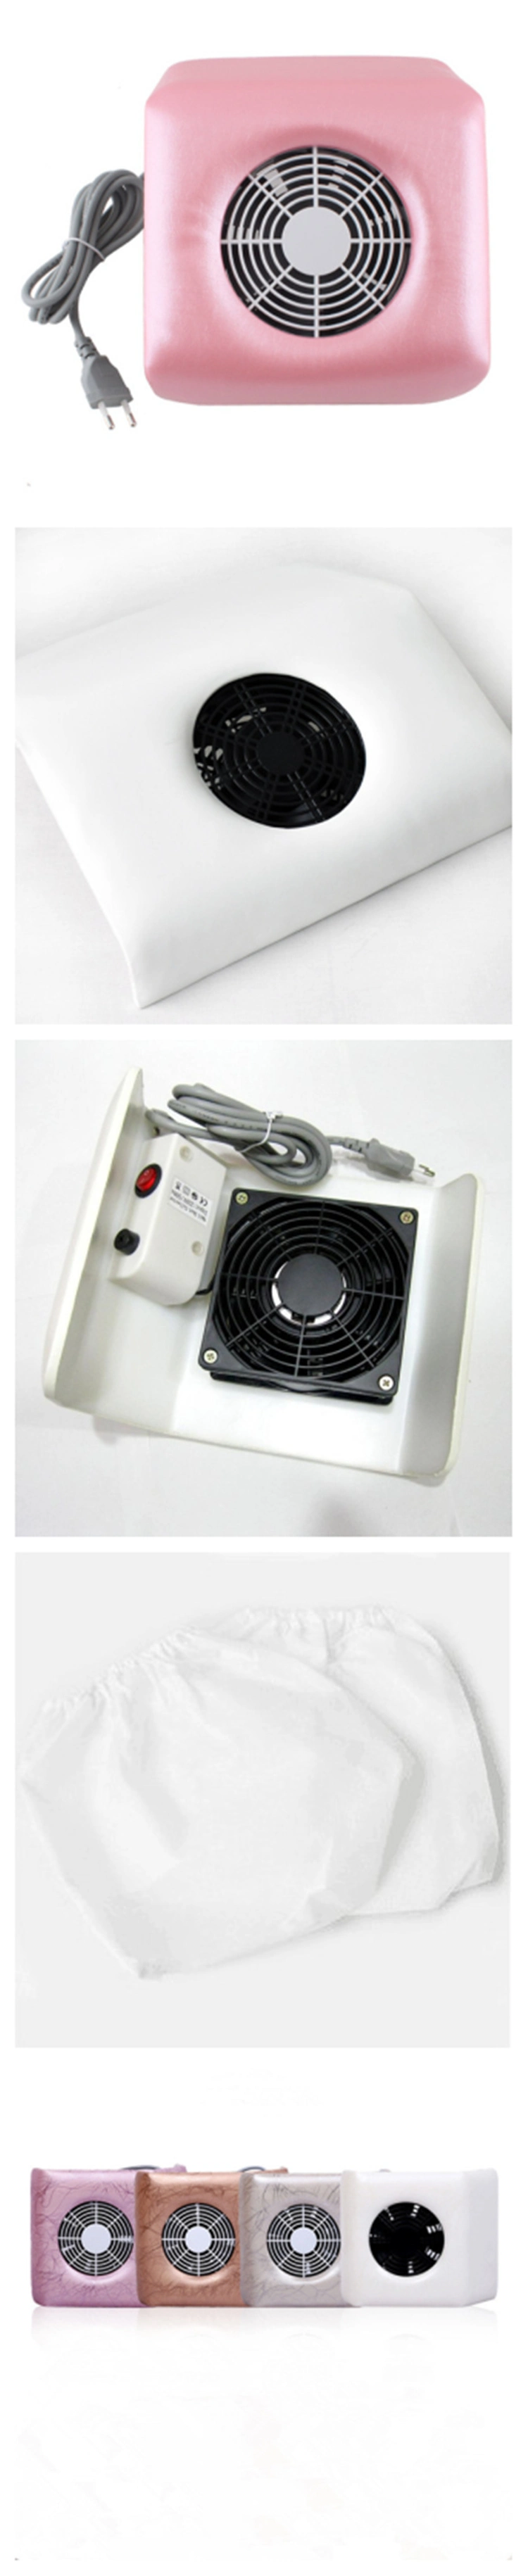 Wholesale Nail Dust Collector Vacuum for Polish Acrylic Nails